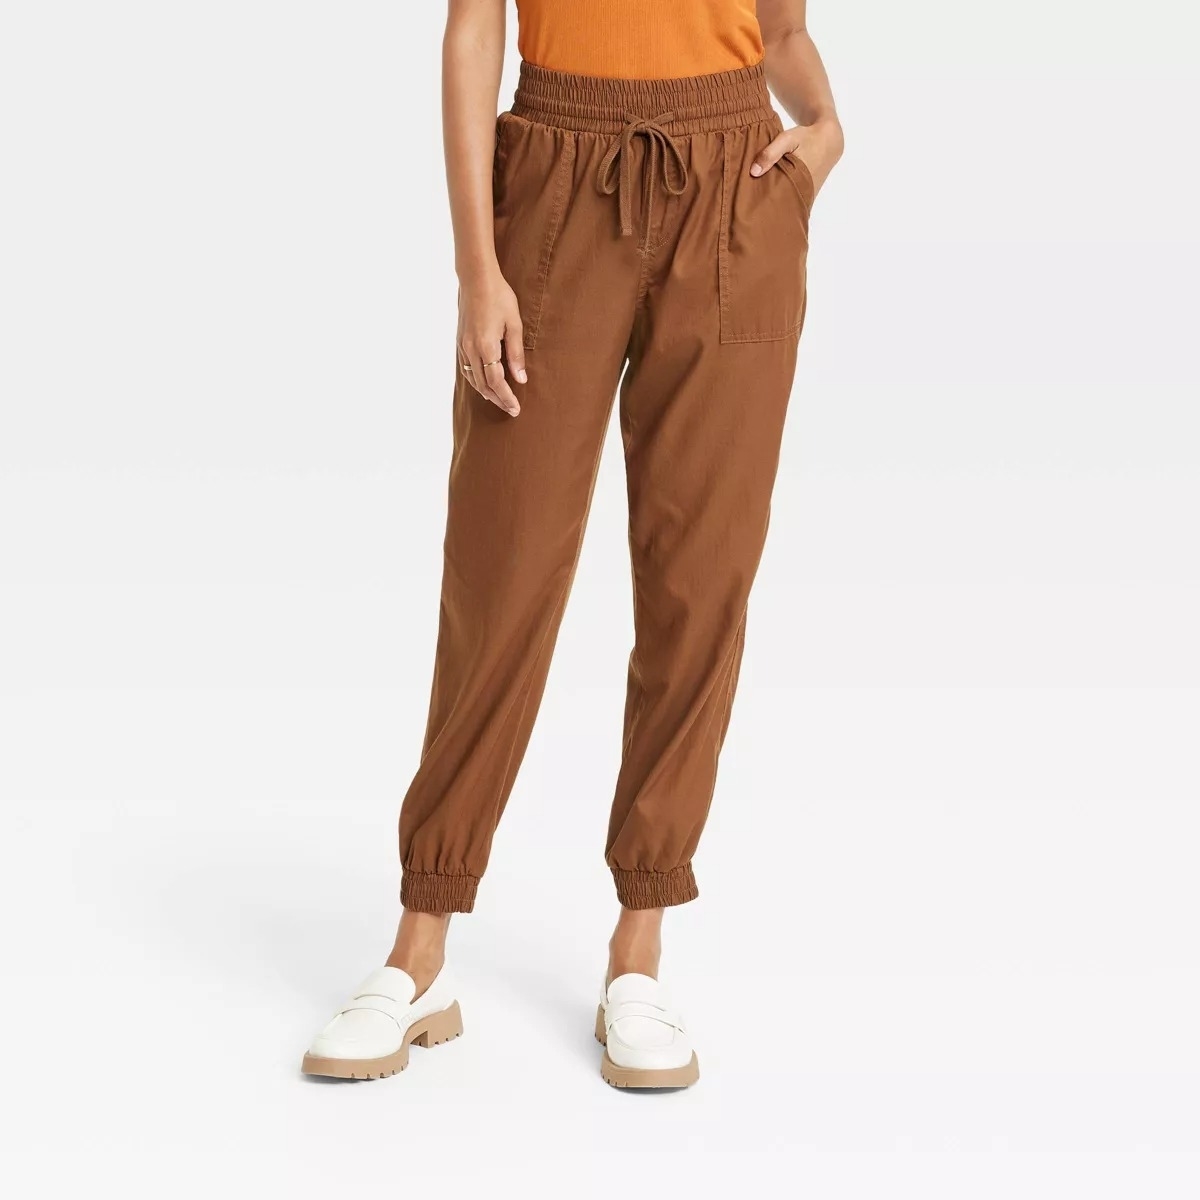 brown joggers with drawstring waist on model